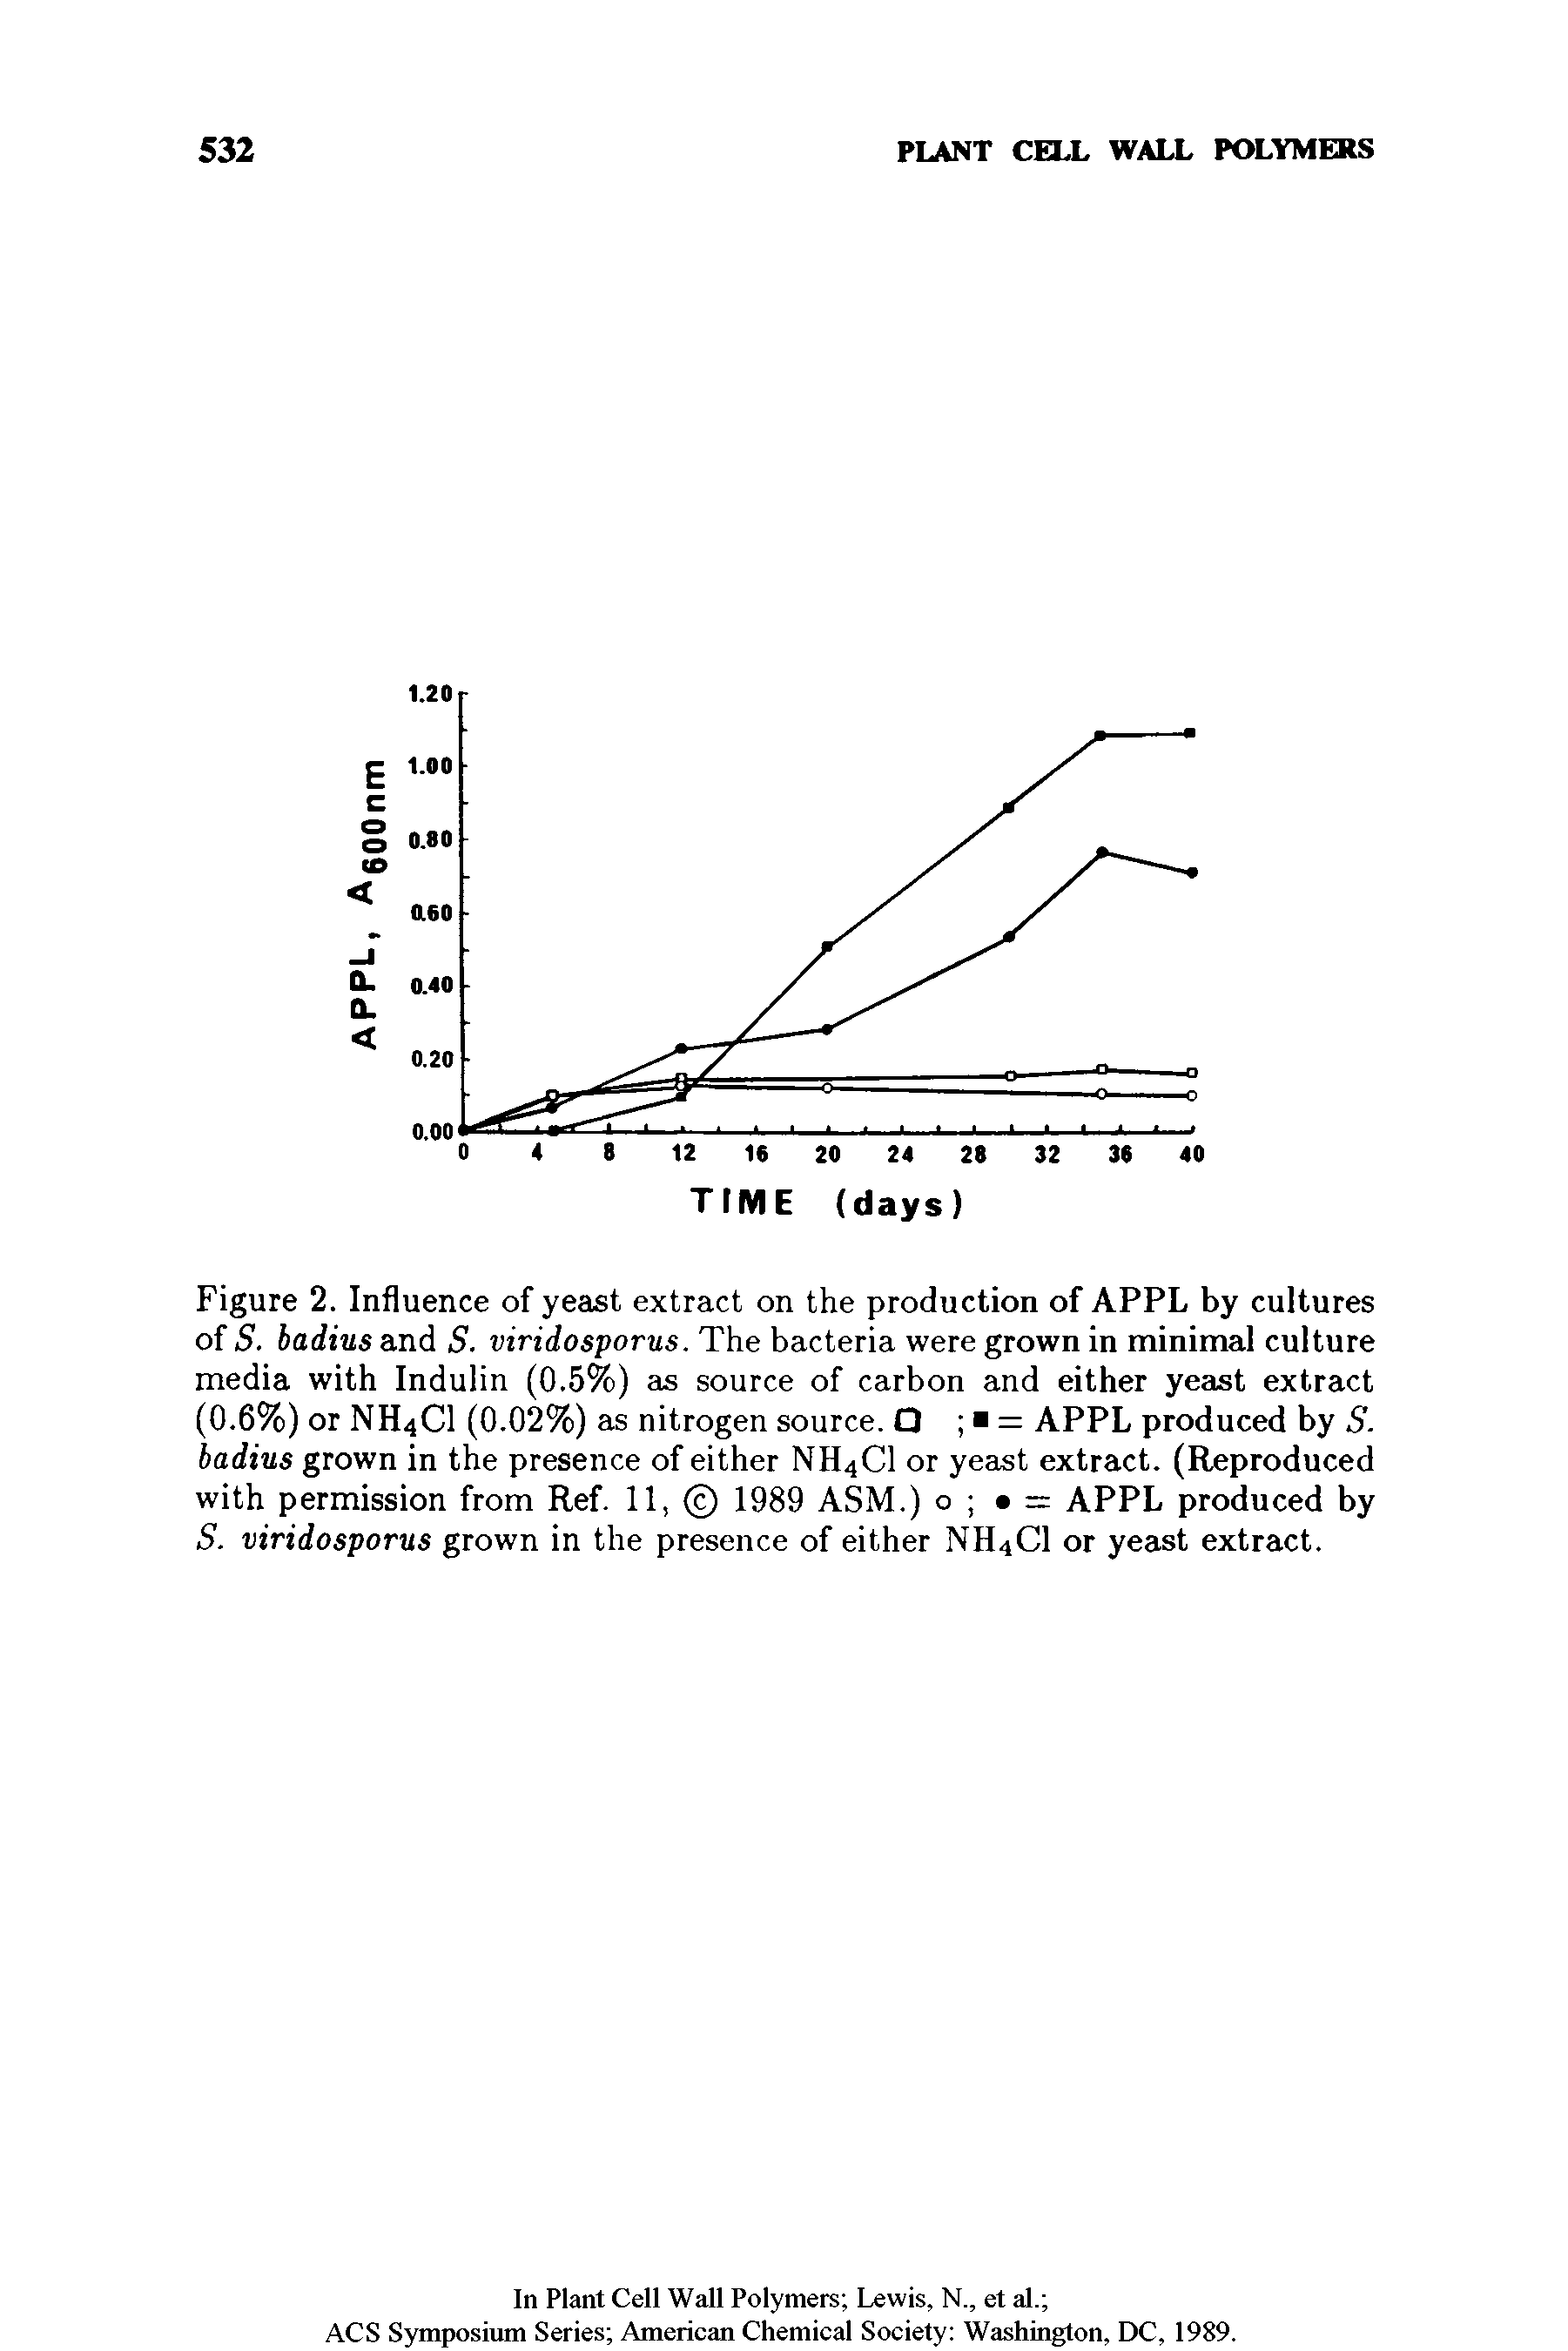 Figure 2. Influence of yeast extract on the production of APPL by cultures of S. badius and S. viridosporus. The bacteria were grown in minimal culture media with Indulin (0.5%) as source of carbon and either yeast extract (0.6%) or NH4CI (0.02%) as nitrogen source. Q = APPL produced by S. badius grown in the presence of either NH4CI or yeast extract. (Reproduced with permission from Ref. 11, 1989 ASM.) o = APPL produced by S. viridosporus grown in the presence of either NH4CI or yeast extract.